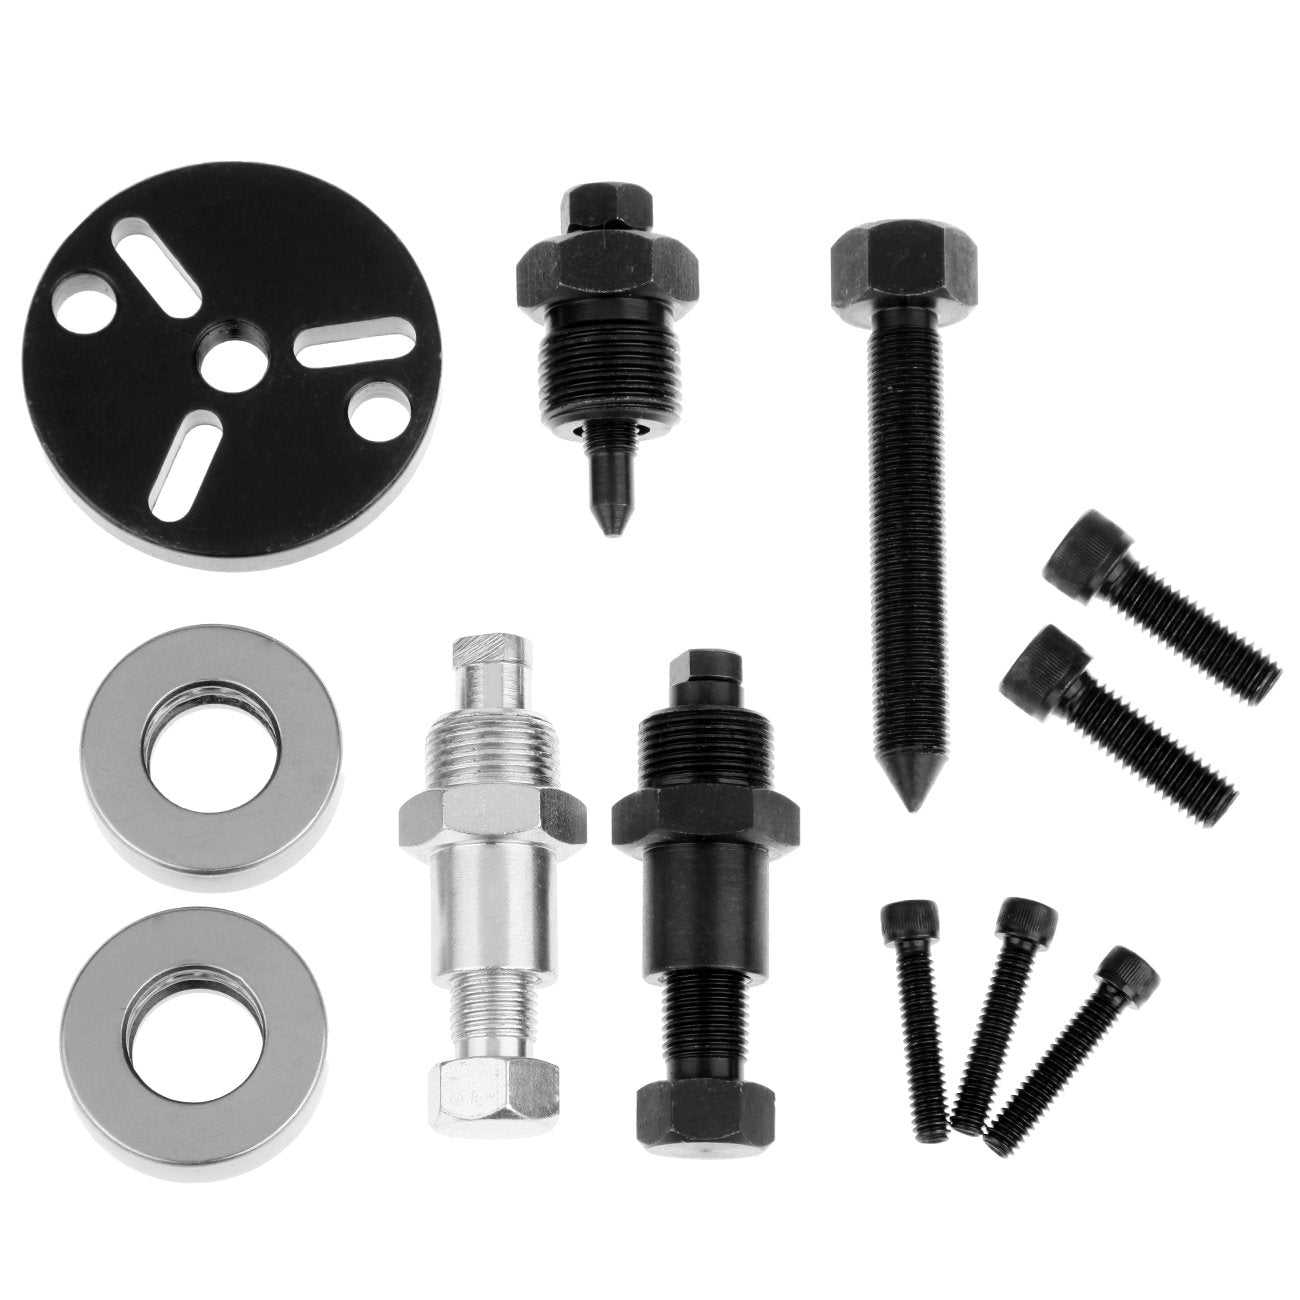 Automotive Air Conditioning A/C Compressor Clutch Tool Kit